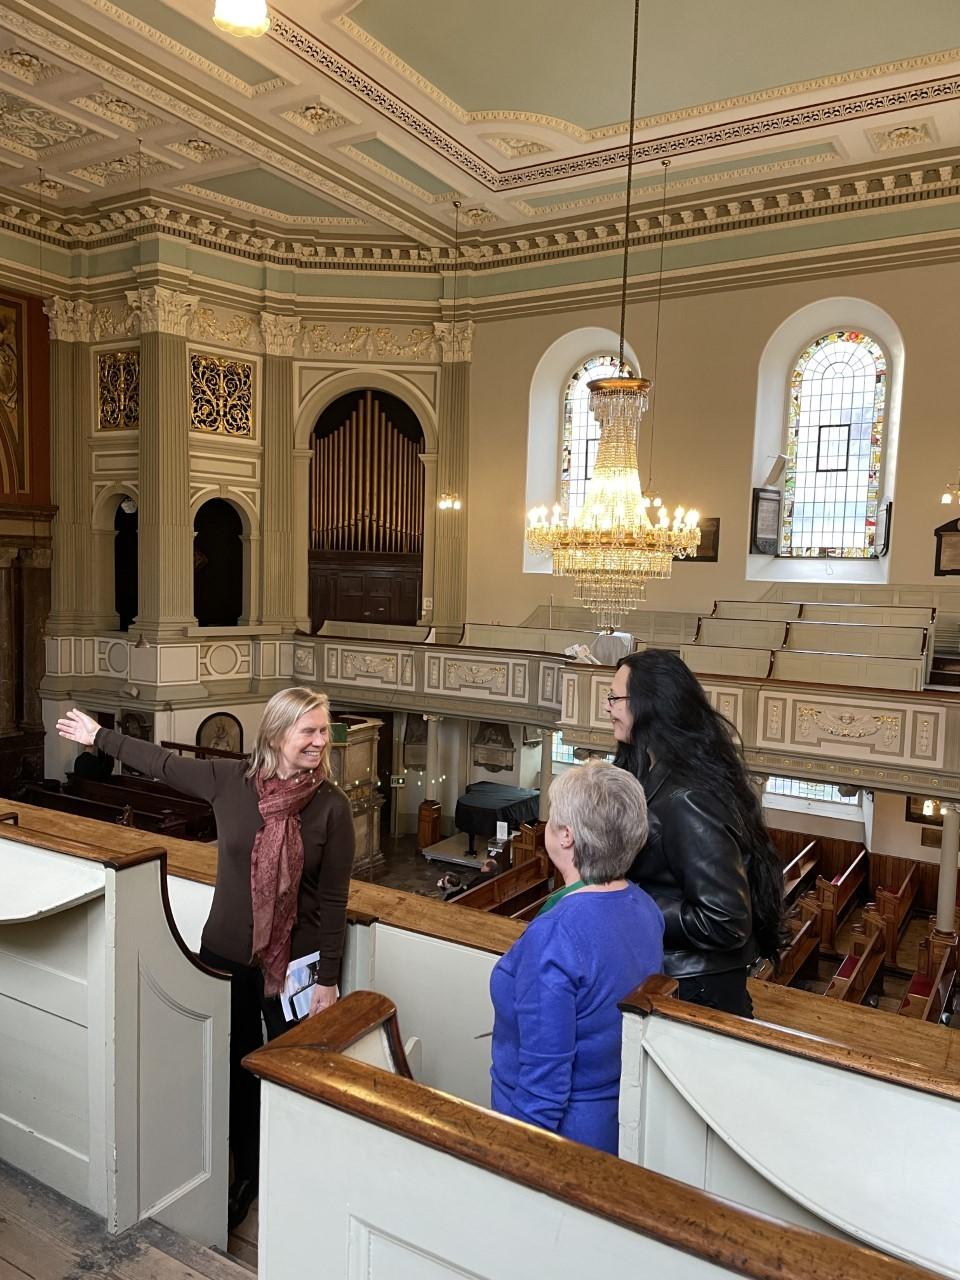 Three people standing in the gallery in a church